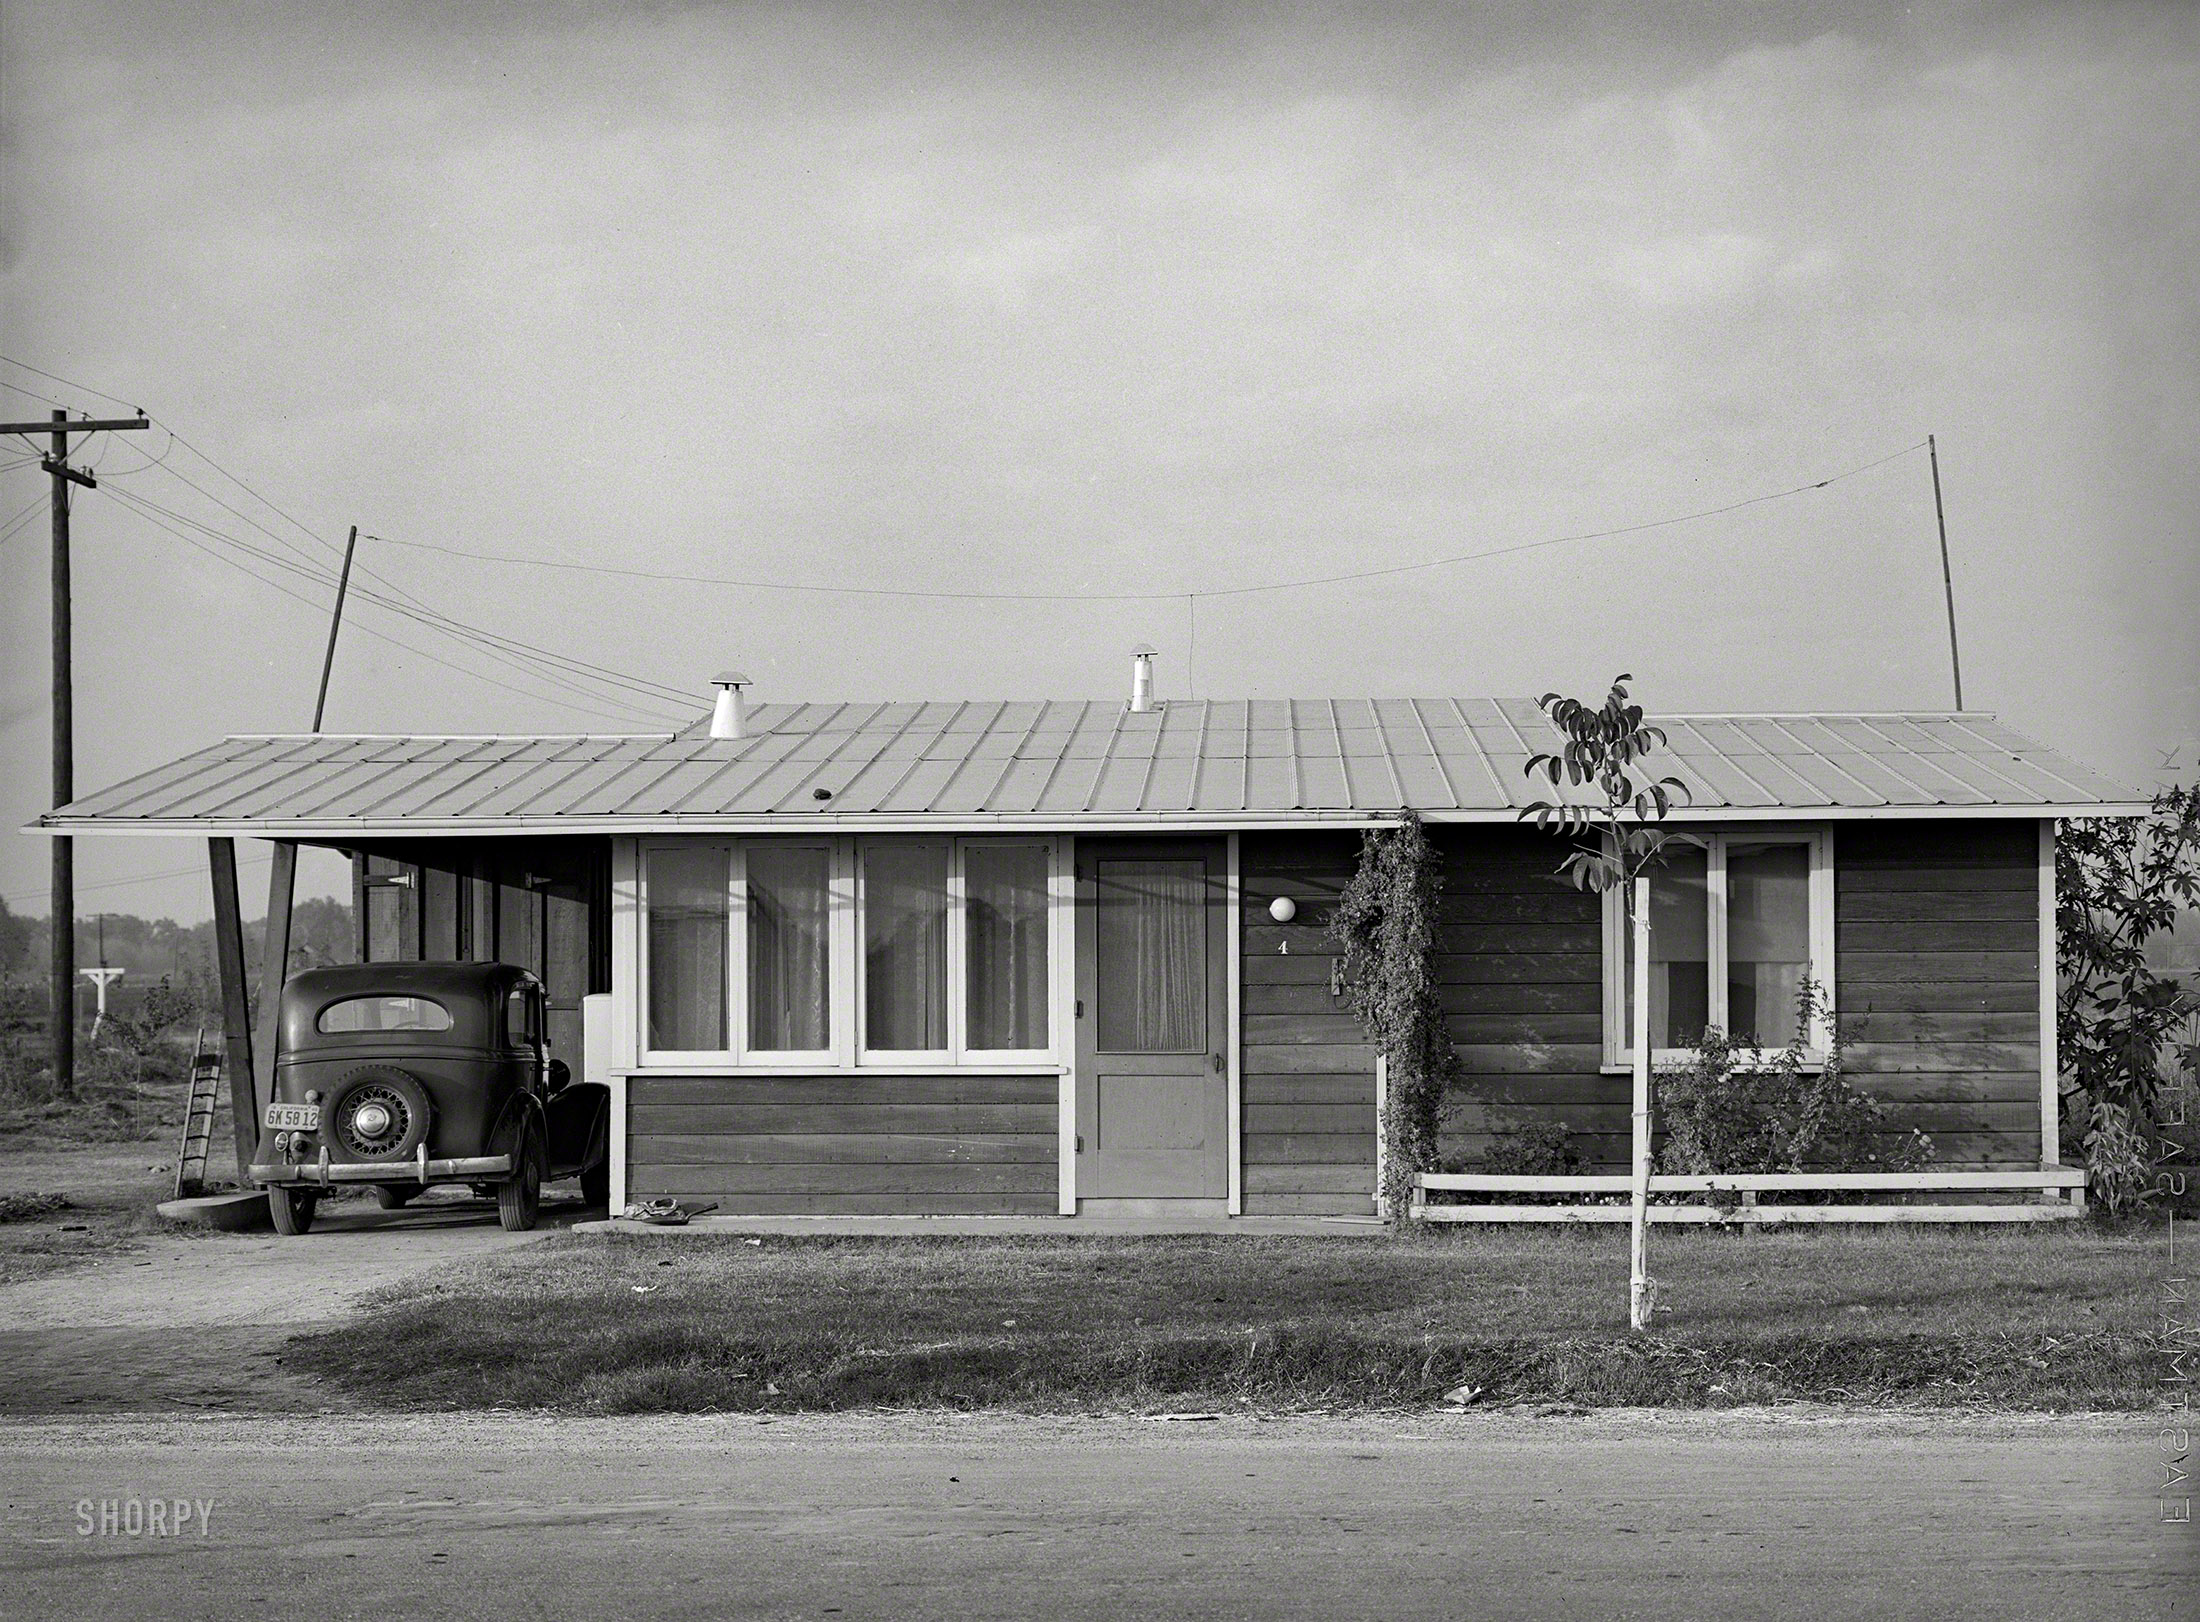 November 1940. Tulare County, California. "One of the homes at Mineral King cooperative farm, an old ranch of 500 acres raising cotton, alfalfa, and dairy products for cash crops. Ten families [including the Schmidts] have been established here by the Farm Security Administration in modern houses." Forerunner of the suburban ranch house that characterized so much postwar residential development. Medium format negative by Russell Lee. View full size.